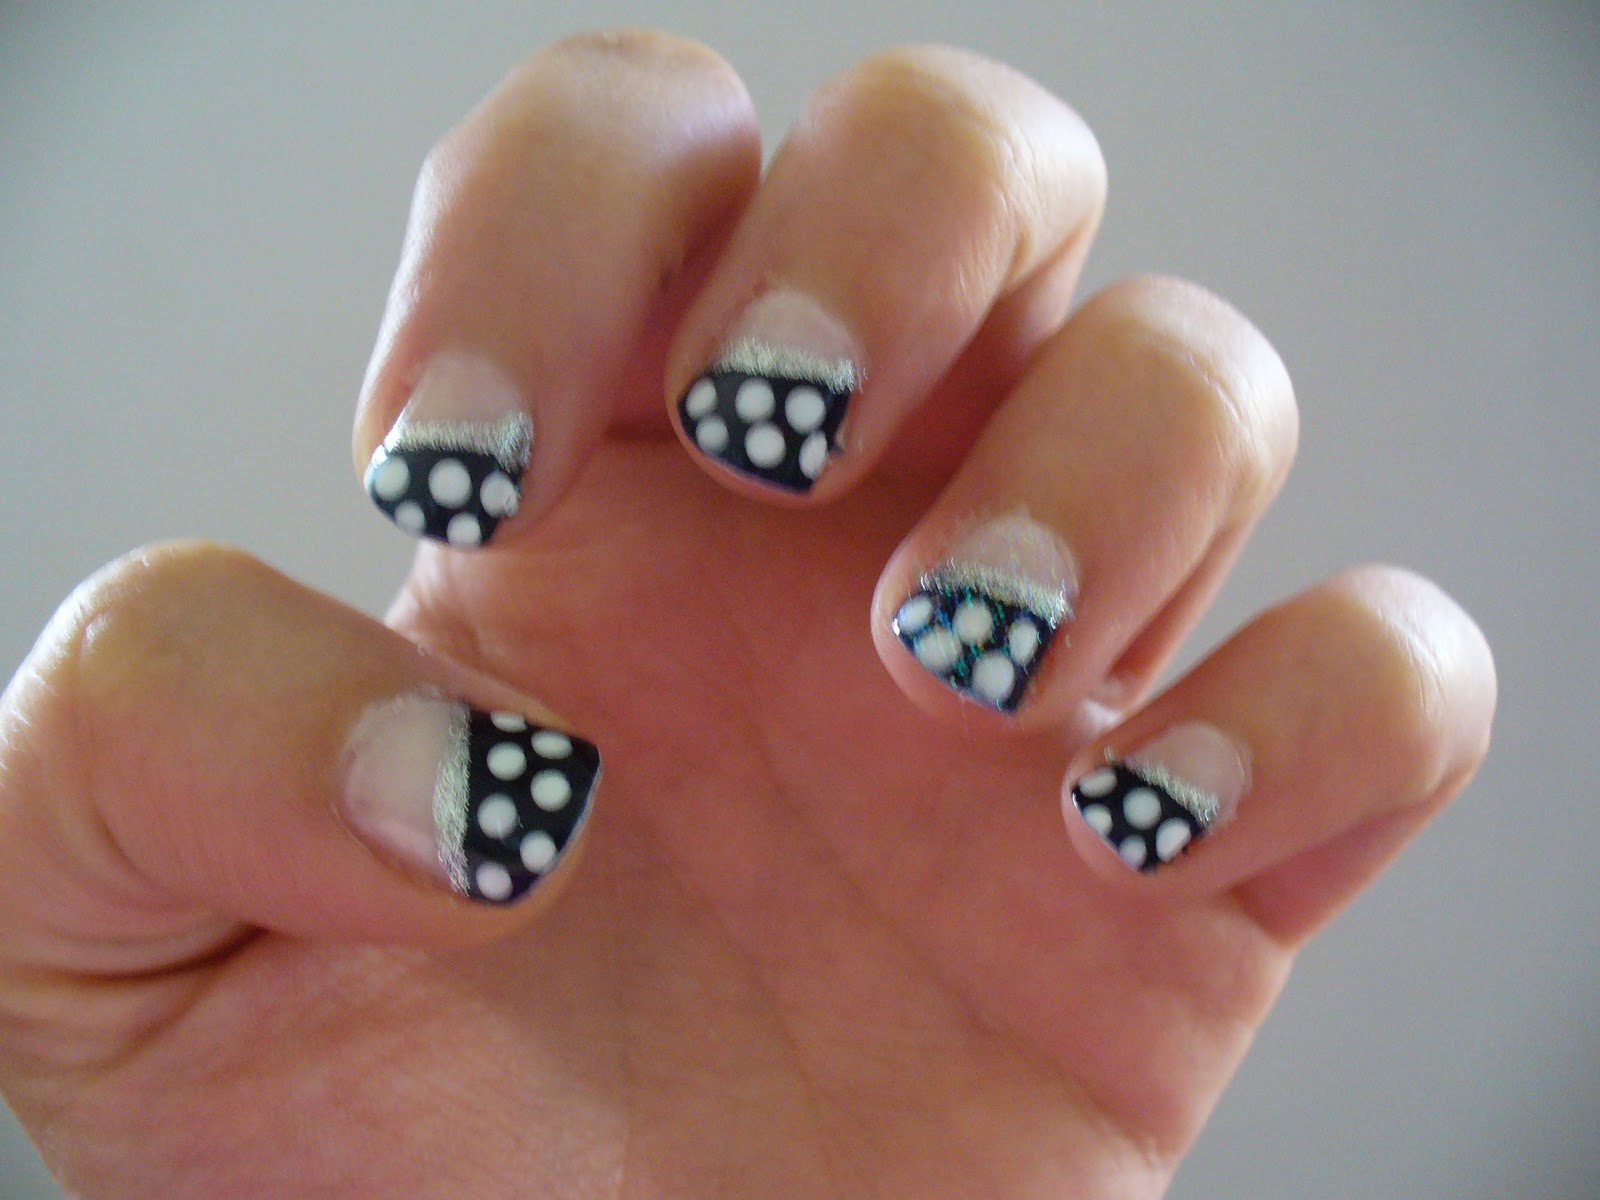 6. "Cute and Simple Nail Art for Bitten Nails" - wide 9